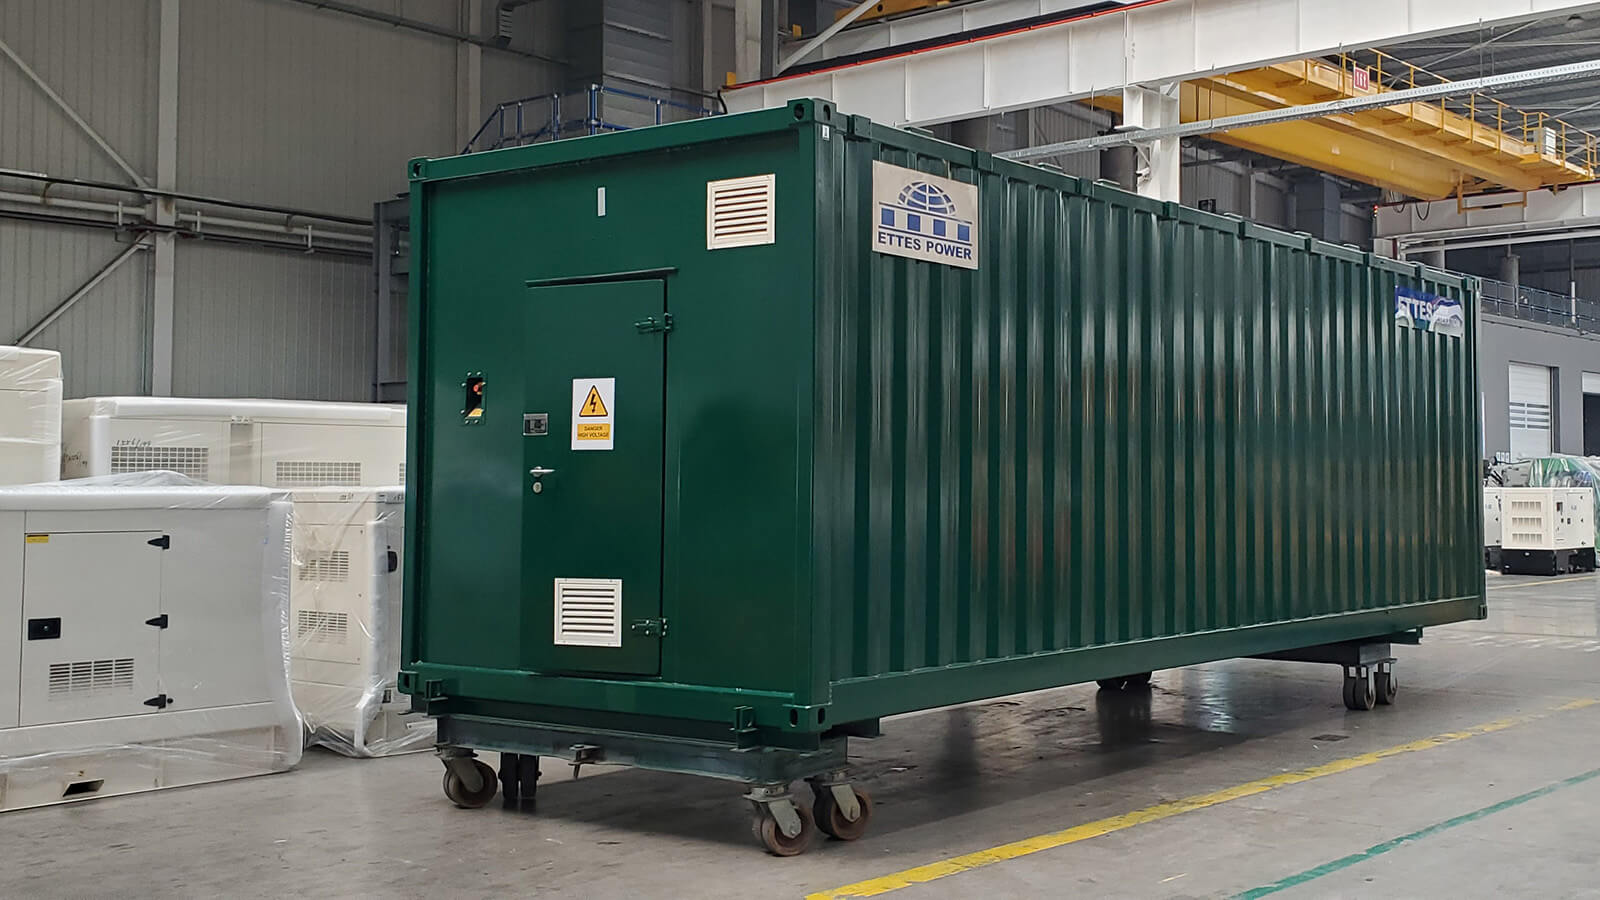 MAN Containerized Digester Biogas Generators are Transported to Seaport ETTES POWER